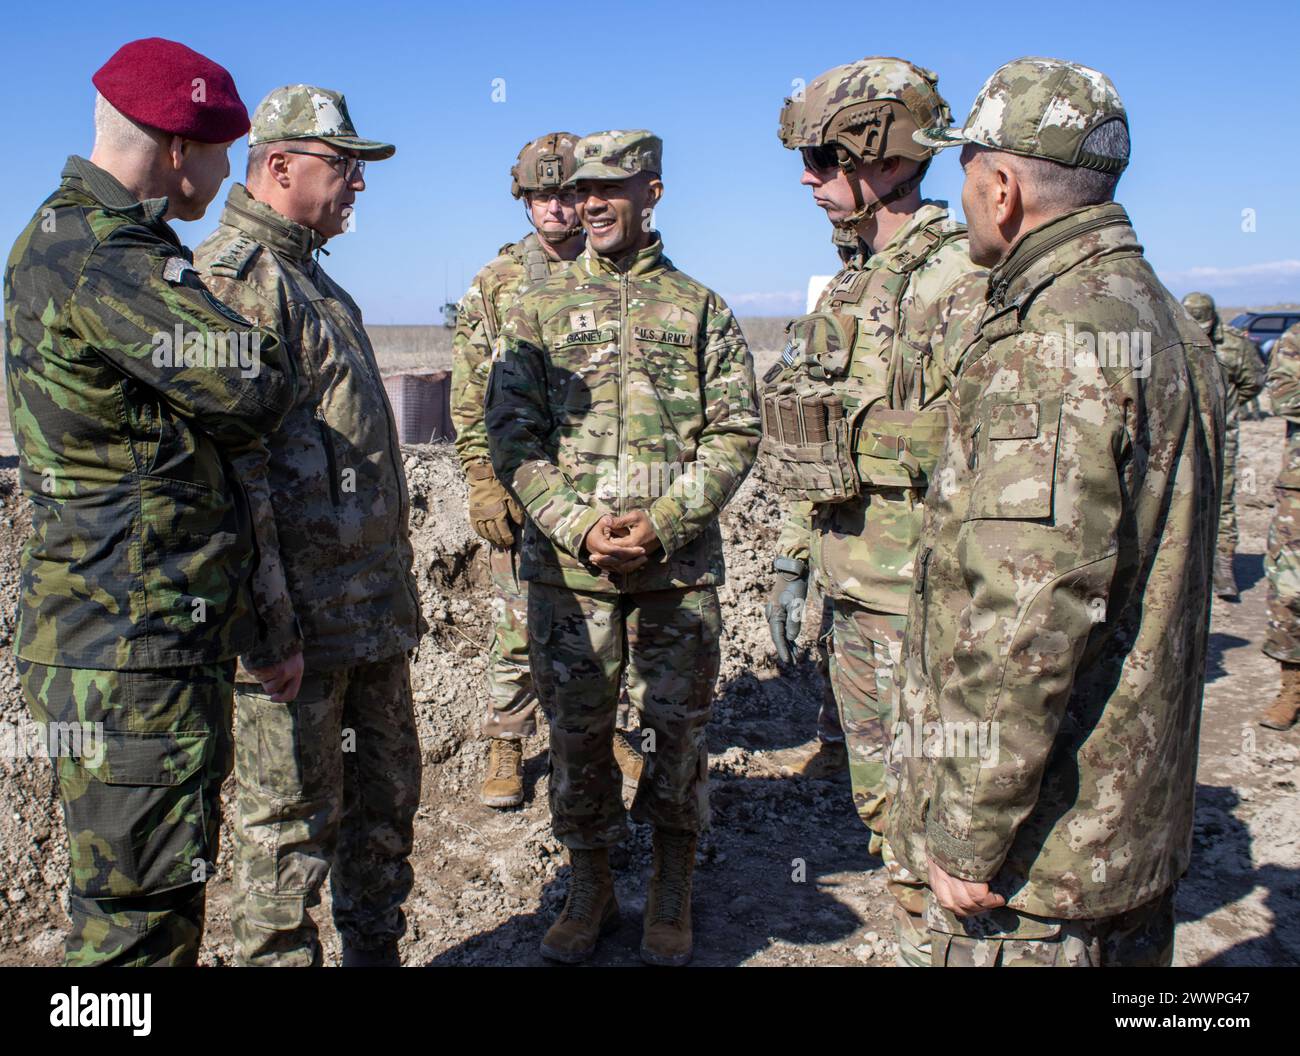 U.S. Army Capt. Patrick Gerrity, commander of Bravo Battery, 1st Battalion, 9th Field Artillery Regiment (Battleking), interacts with U.S. Army,  Türkiye Land Forces, and Czech Republic high-ranking officers, as they visit different firing positions during Exercise Dynamic Front 24 at Polatlı Training Area, Türkiye, Feb. 19, 2024. Exercise Dynamic Front 24 is a U.S. Army Europe and Africa-directed, 56th Artillery Command-led fires-centric exercise in Germany and Türkiye. Artillery Soldiers train in a joint-combined environment, focusing on fire interoperability, command, and control between mu Stock Photo